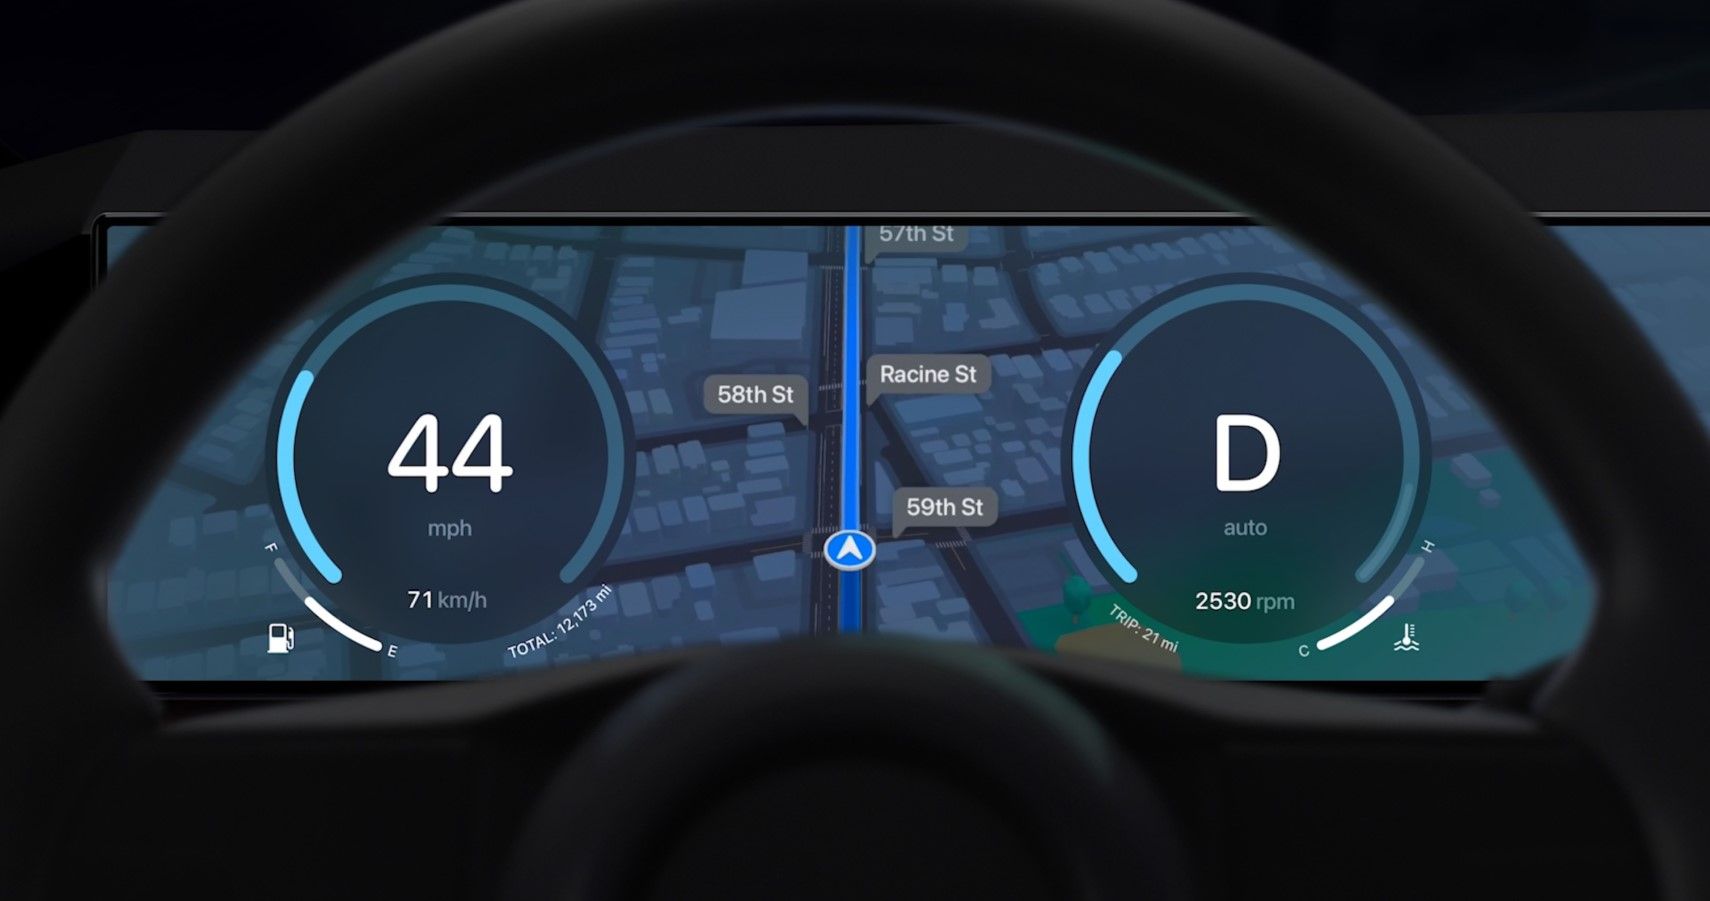 Next-gen Apple CarPlay showing map directions in the instrument cluster